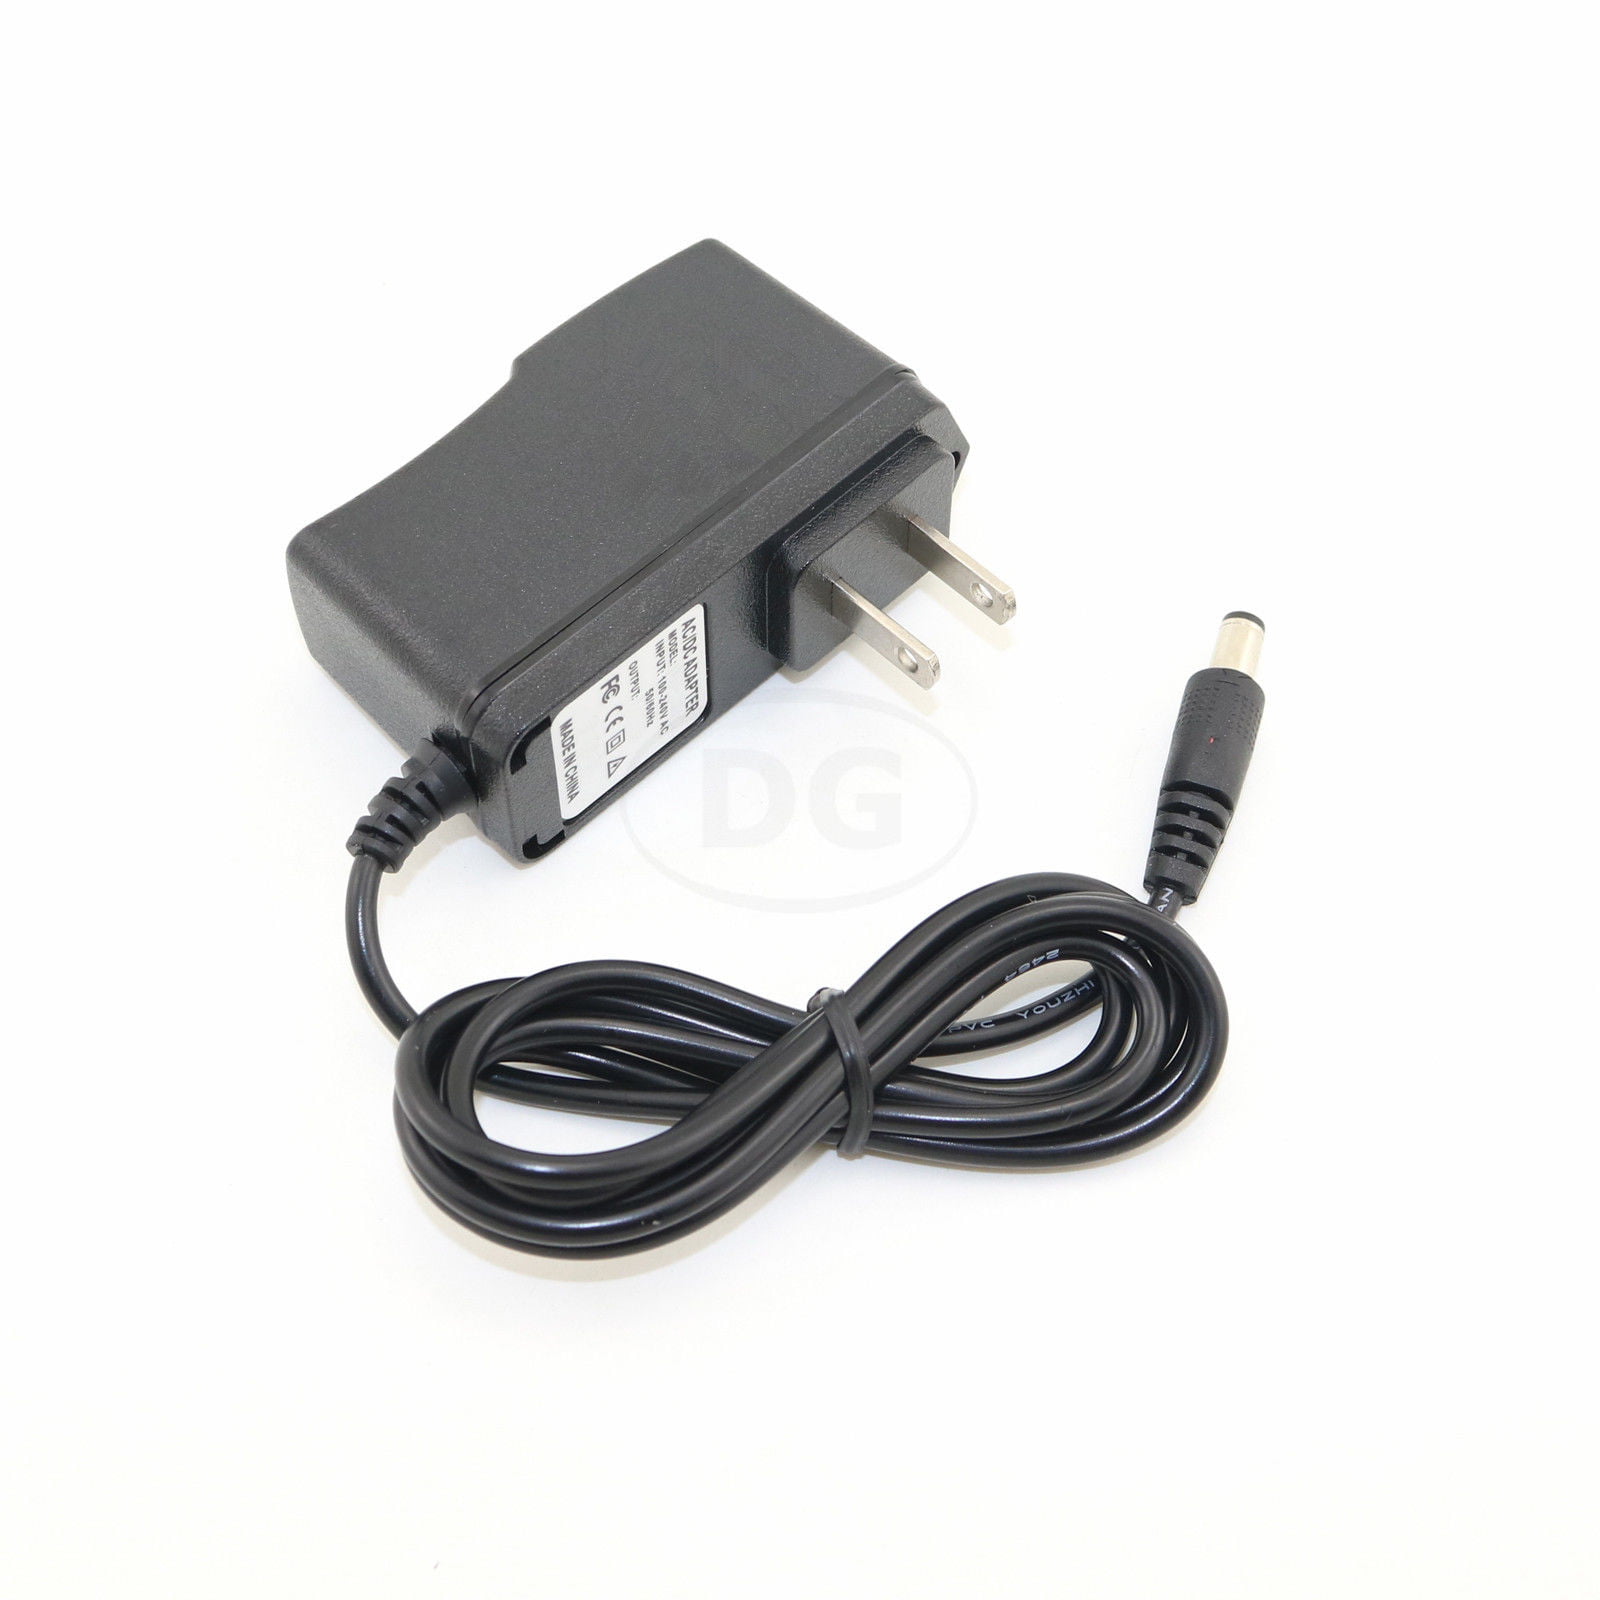 AC Adapter Charger Cord Boss PV-1 PW-10 PW-2 RBF-10 RC-1 - Walmart.com